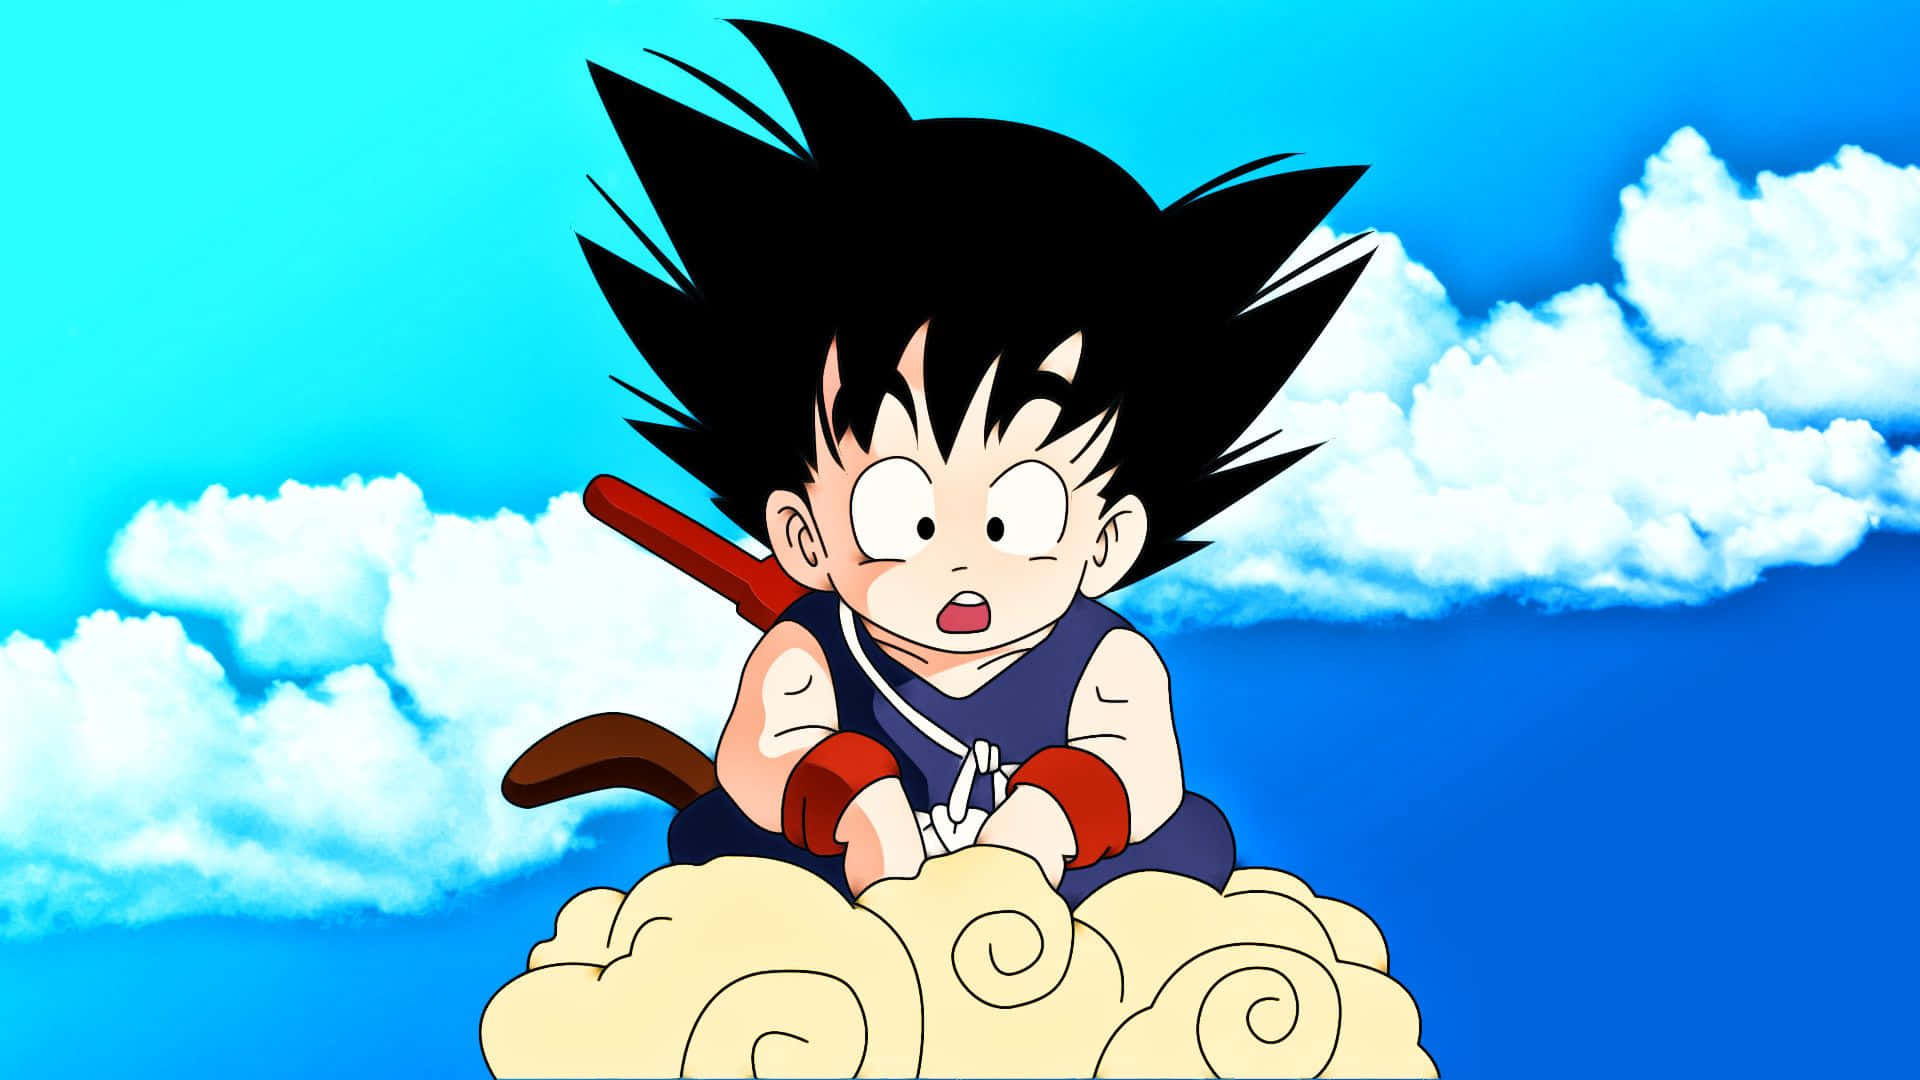 Kid Goku is ready to take on the world! Wallpaper